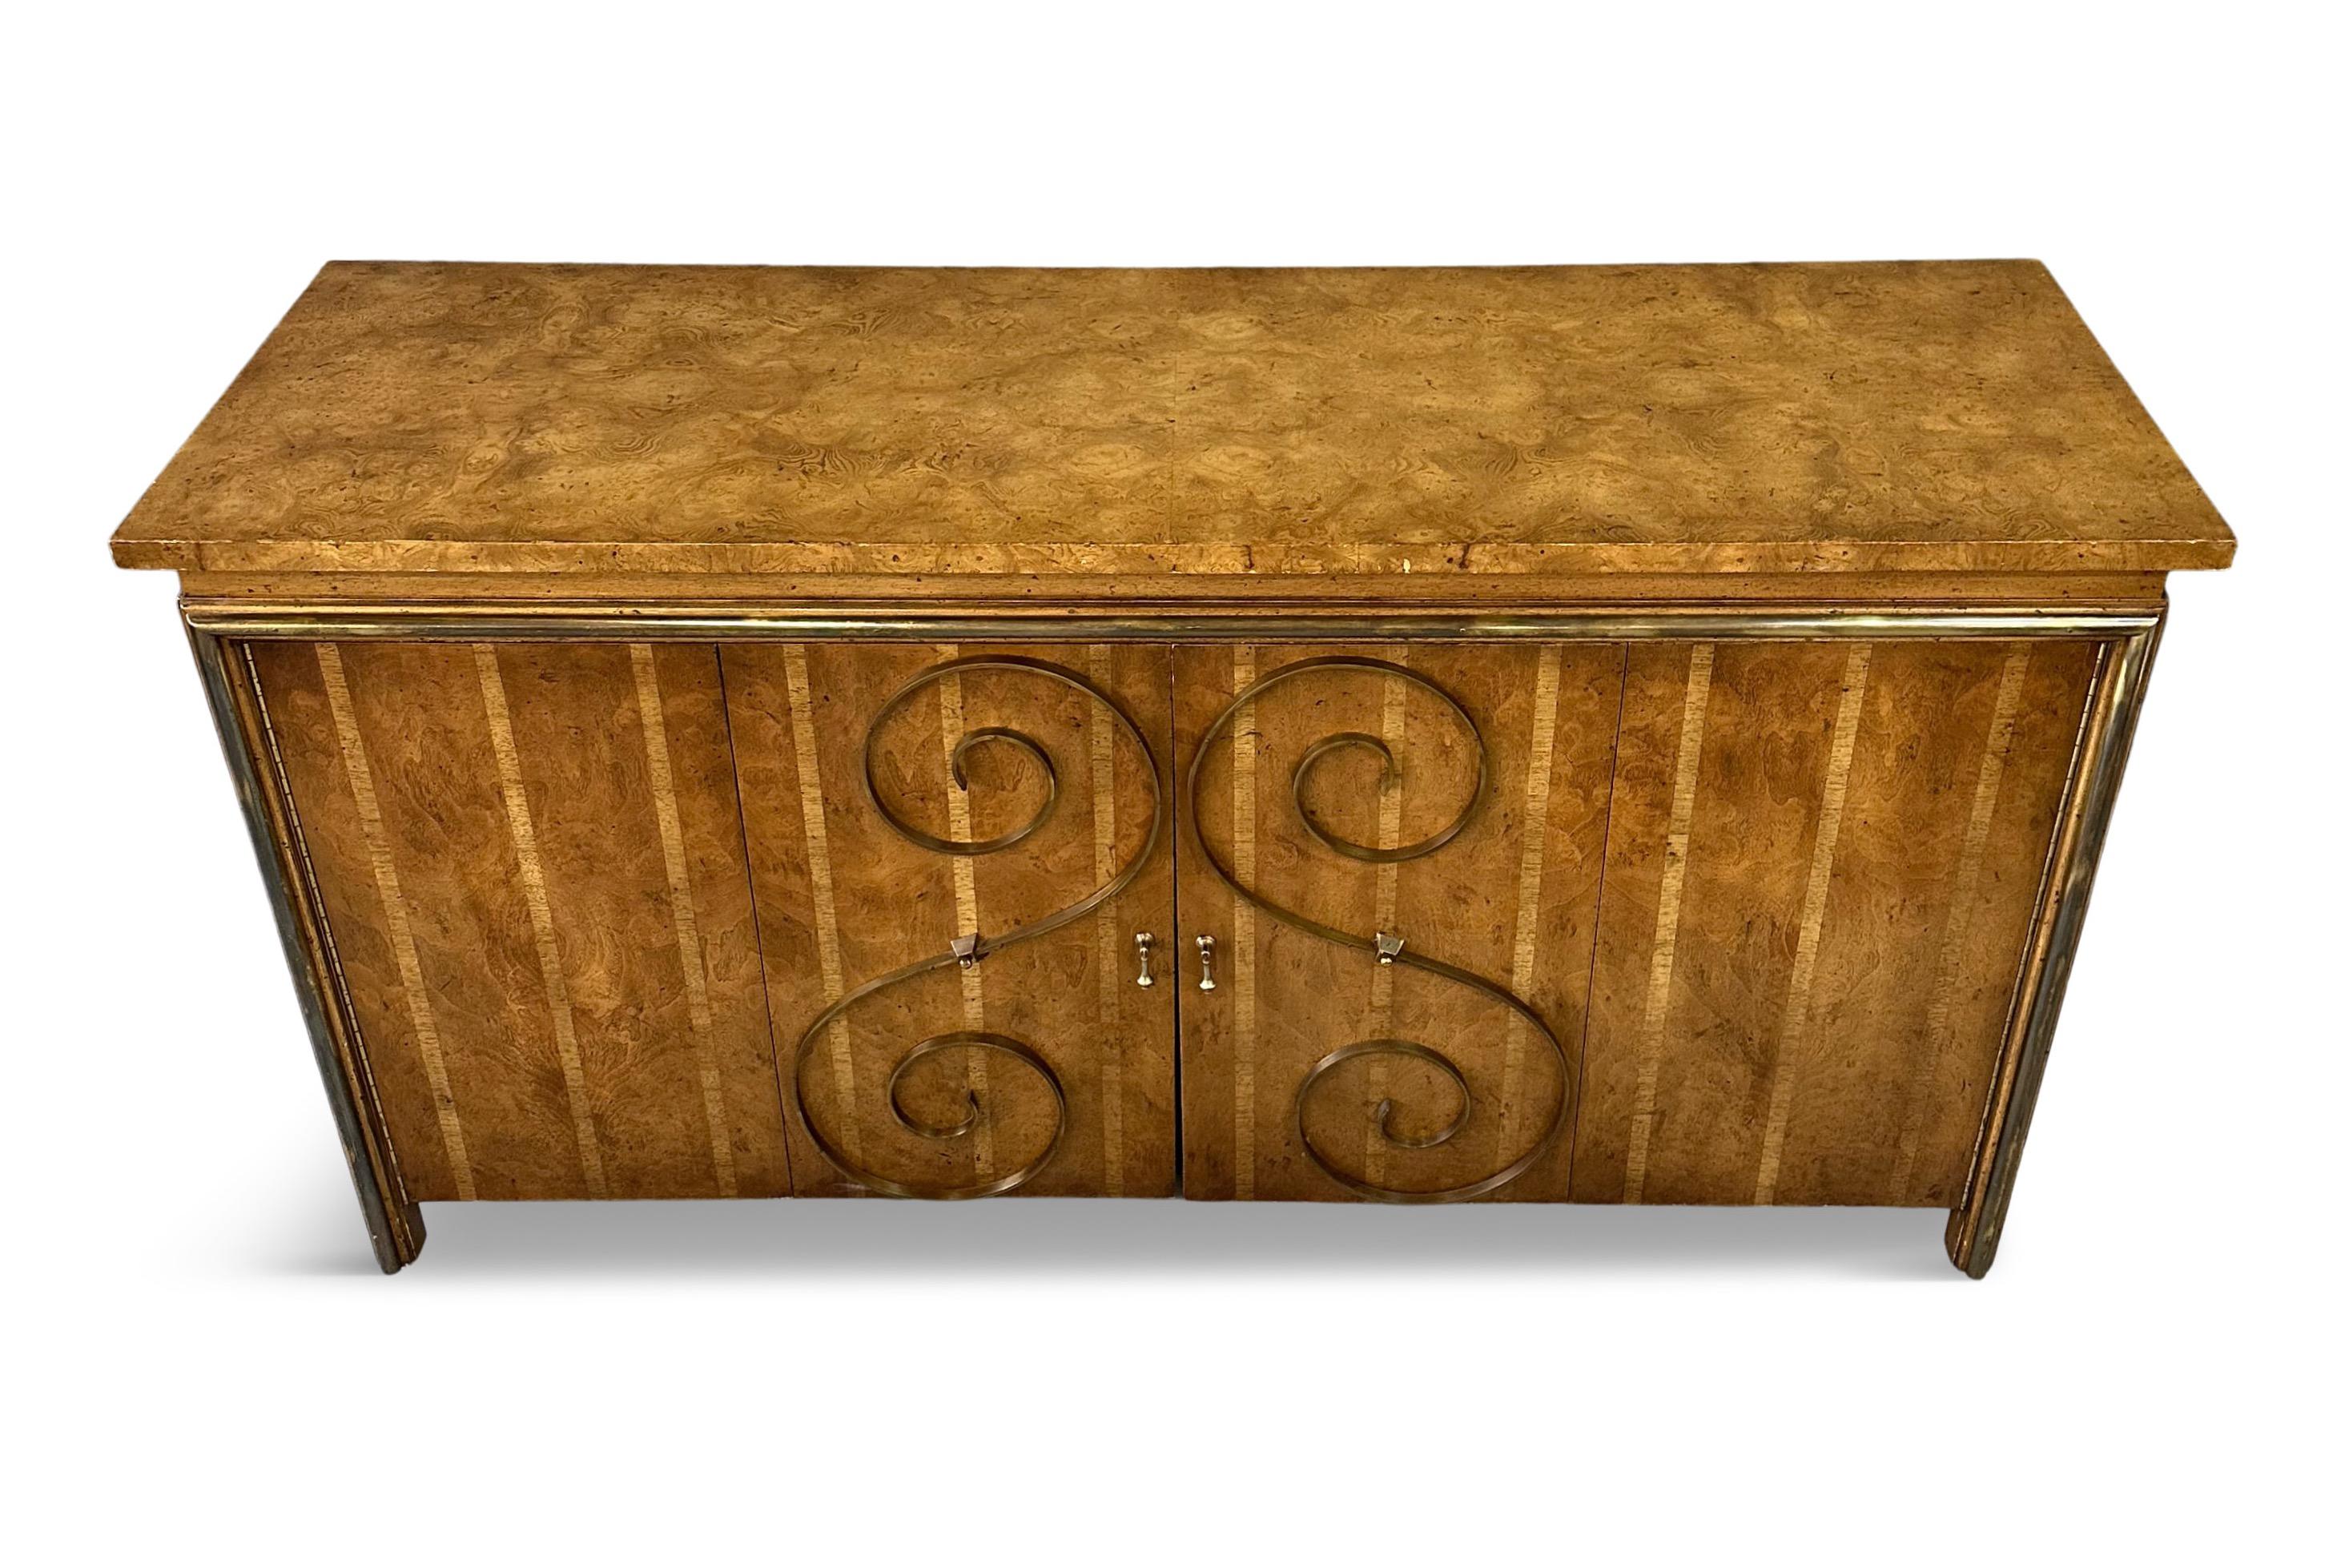 Lovely sideboard with four accordion doors in the Neoclassical style with a burl wood top and gracious brass scrolls decorating the doors. Inside you will find one side has a shelf and the other side has a drawer with silverware separations.